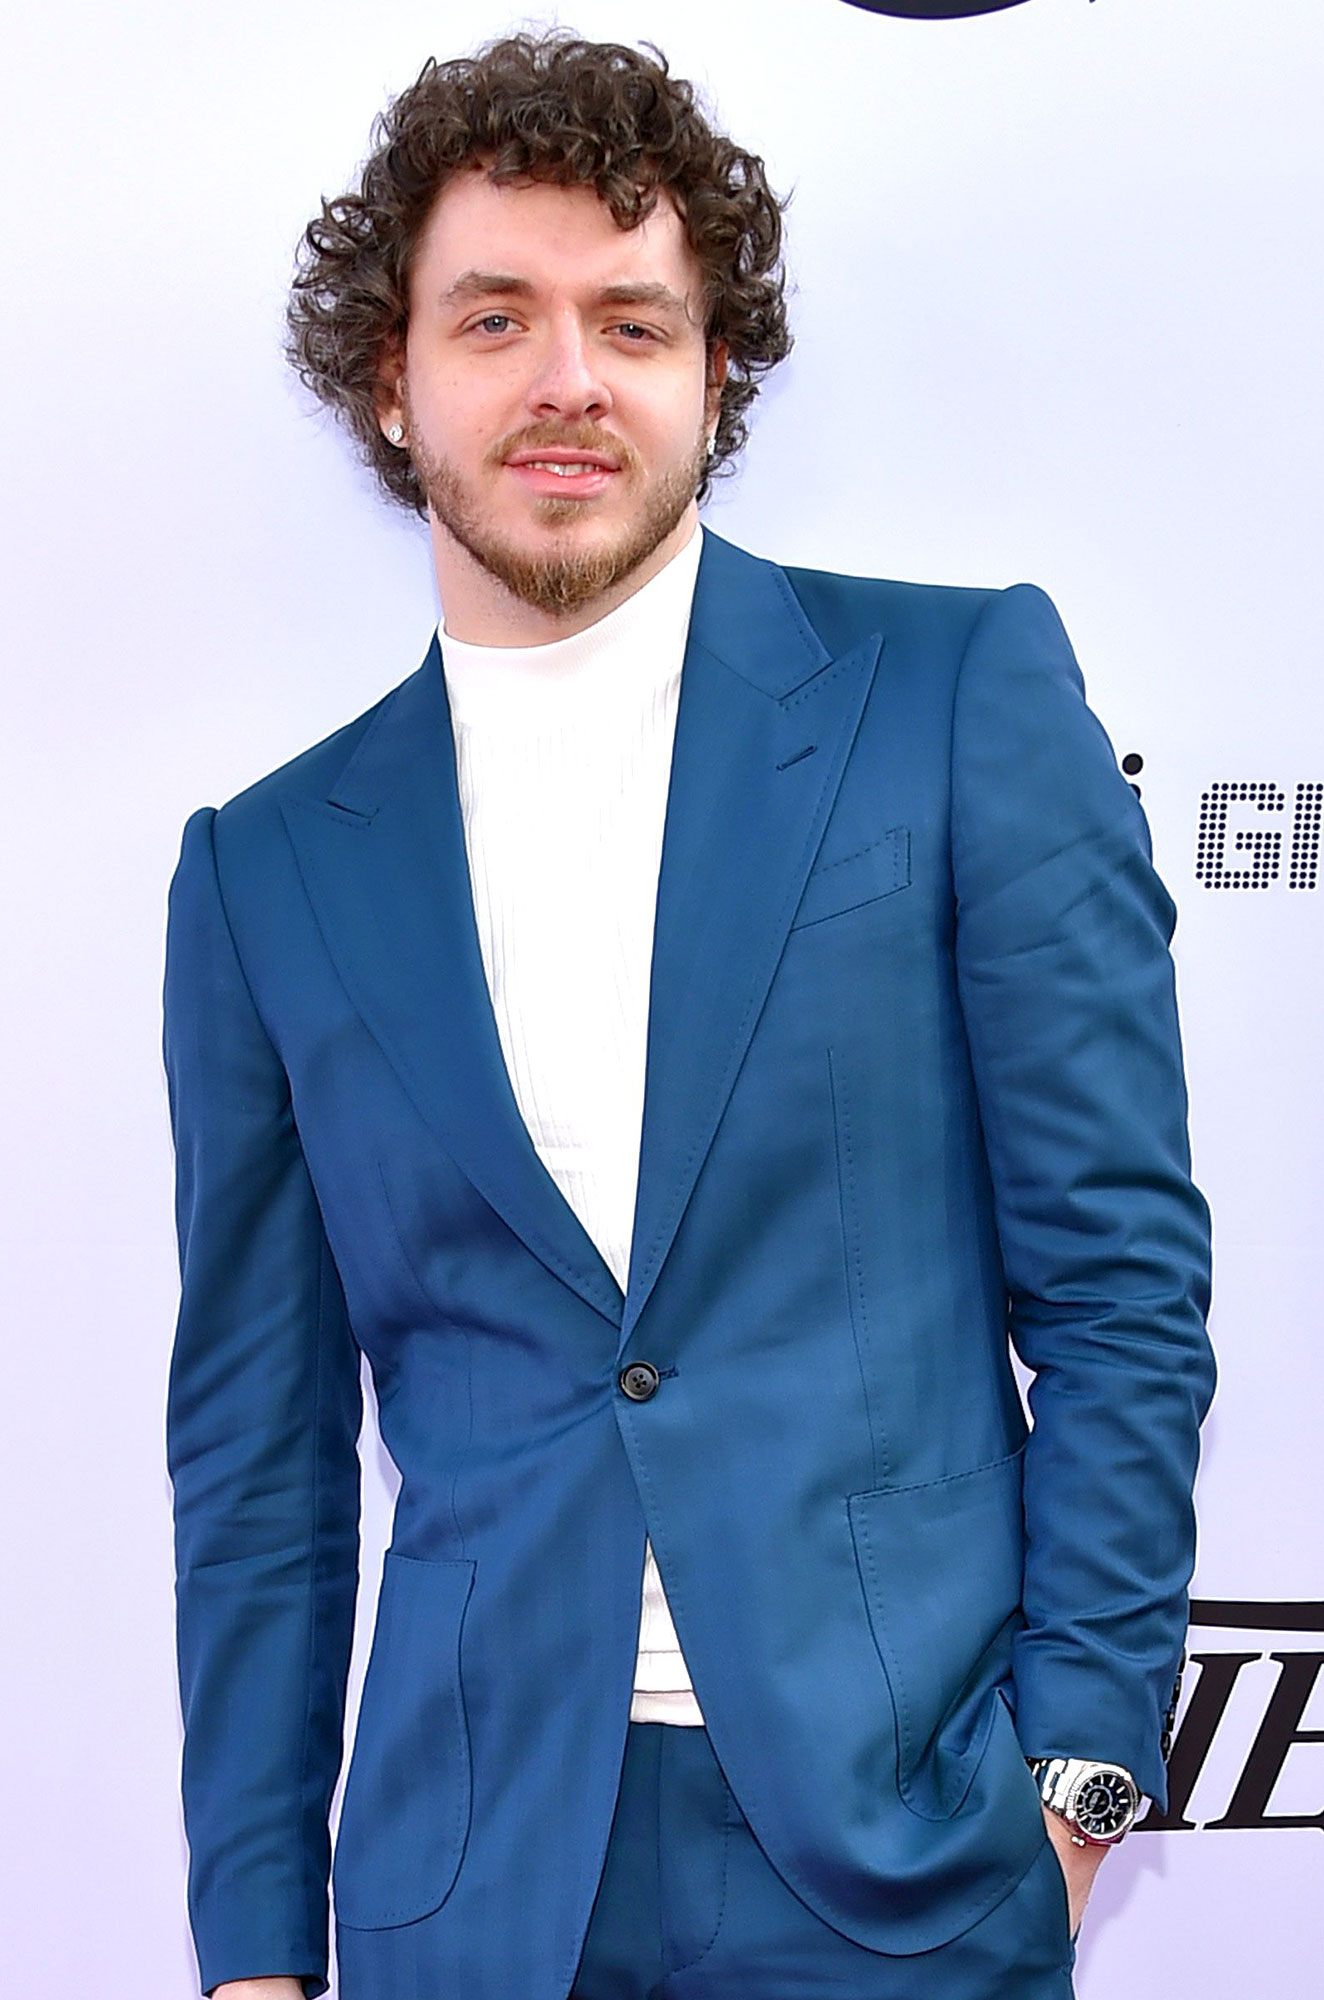 Jack Harlow Celebrity Charity Stars Who Use Their Influence to Give Back